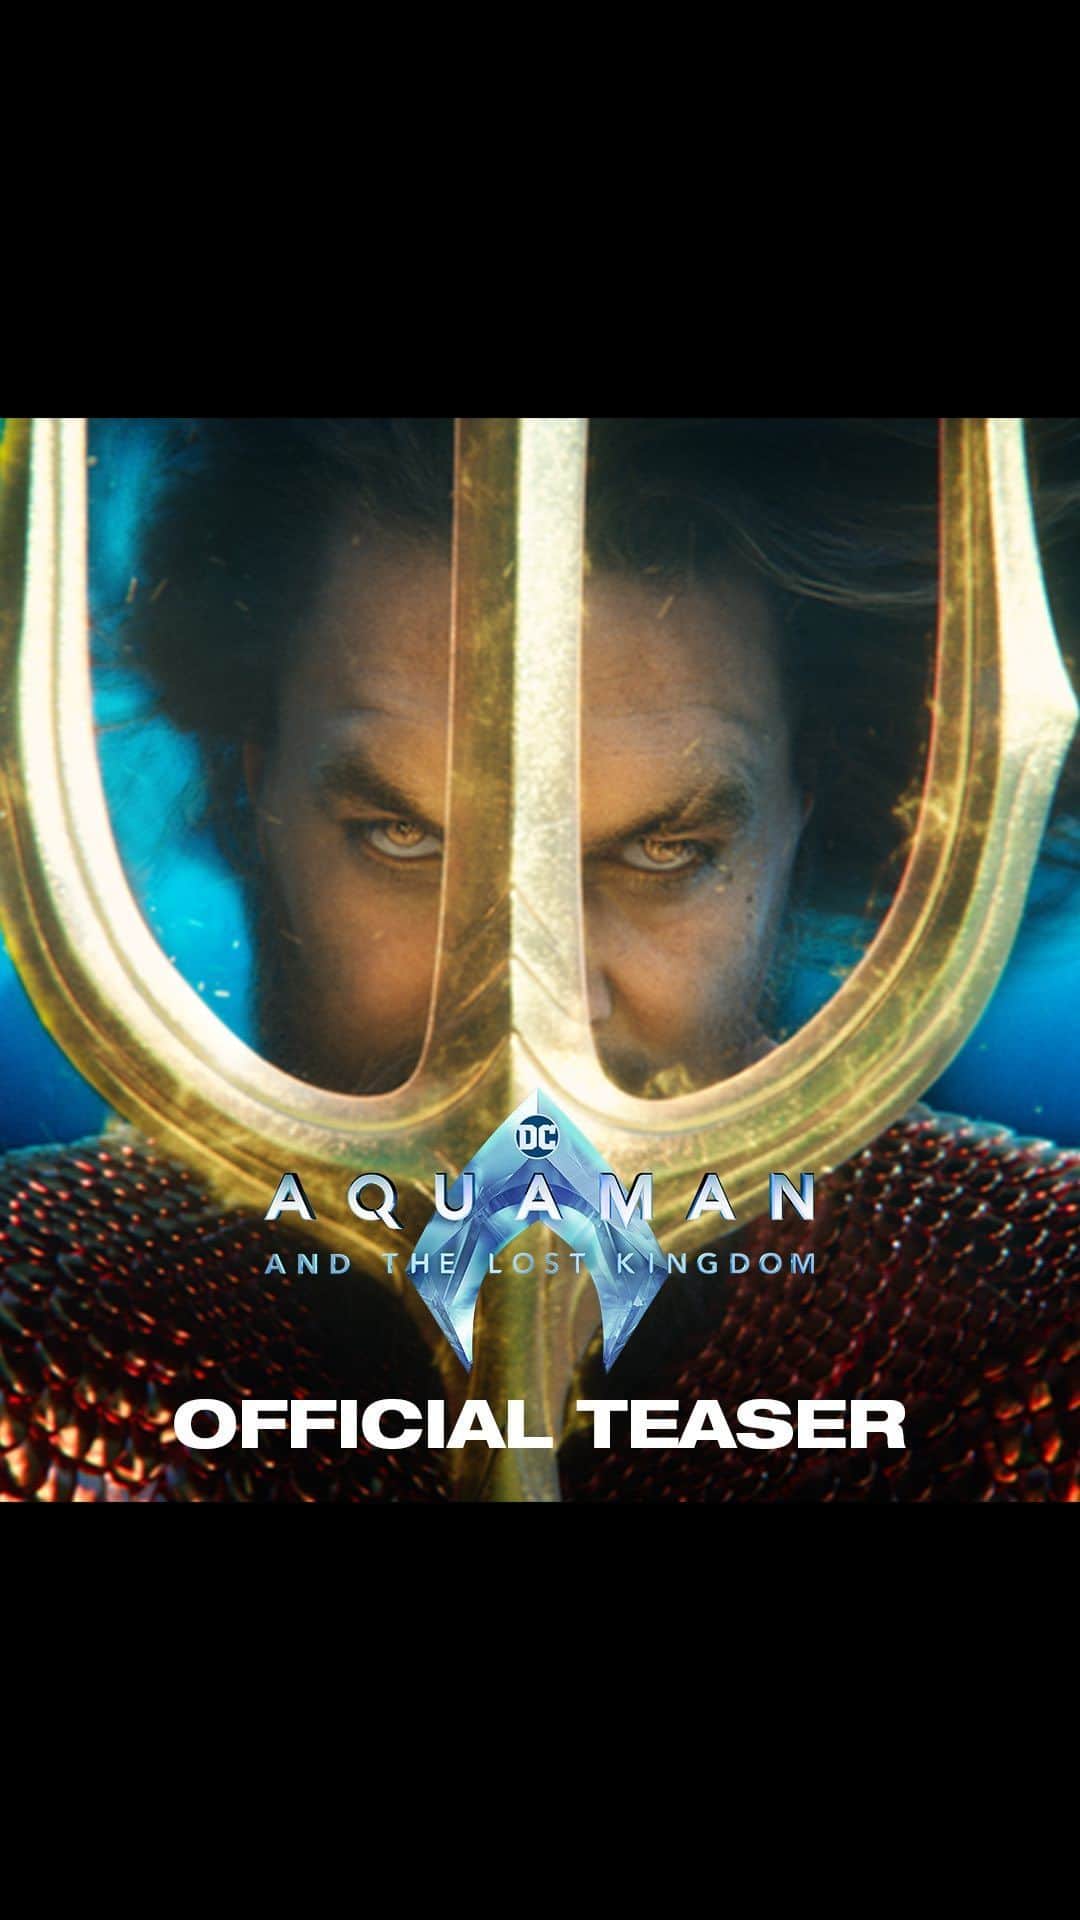 Warner Bros. Picturesのインスタグラム：「Don’t miss the full trailer this Thursday. #Aquaman and the Lost Kingdom - Only in theaters December 20.」